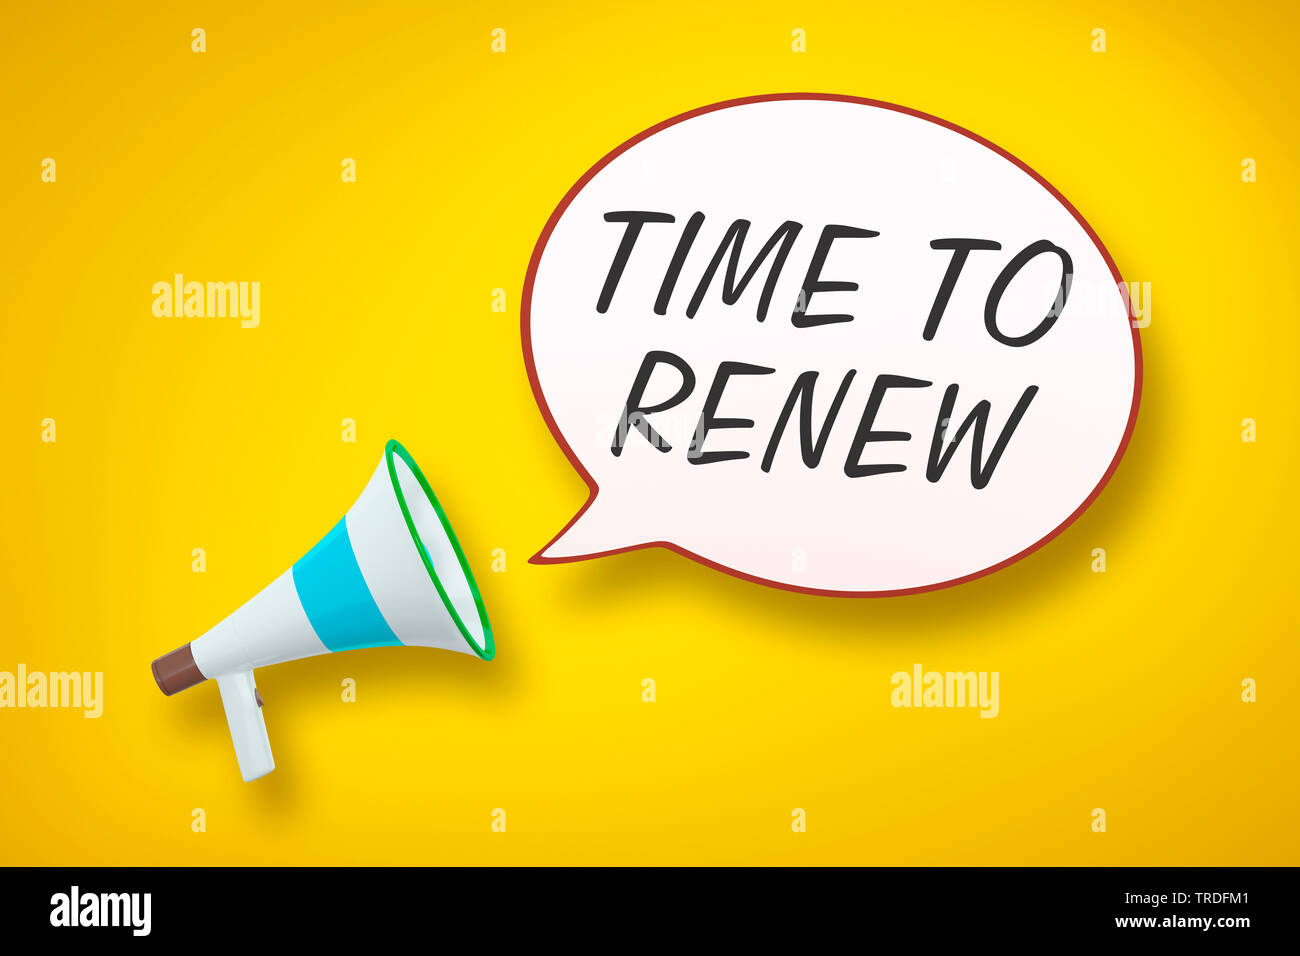 3D computer graphic, megaphone with speech bubble TIME TO RENEW against yellow background Stock Photo